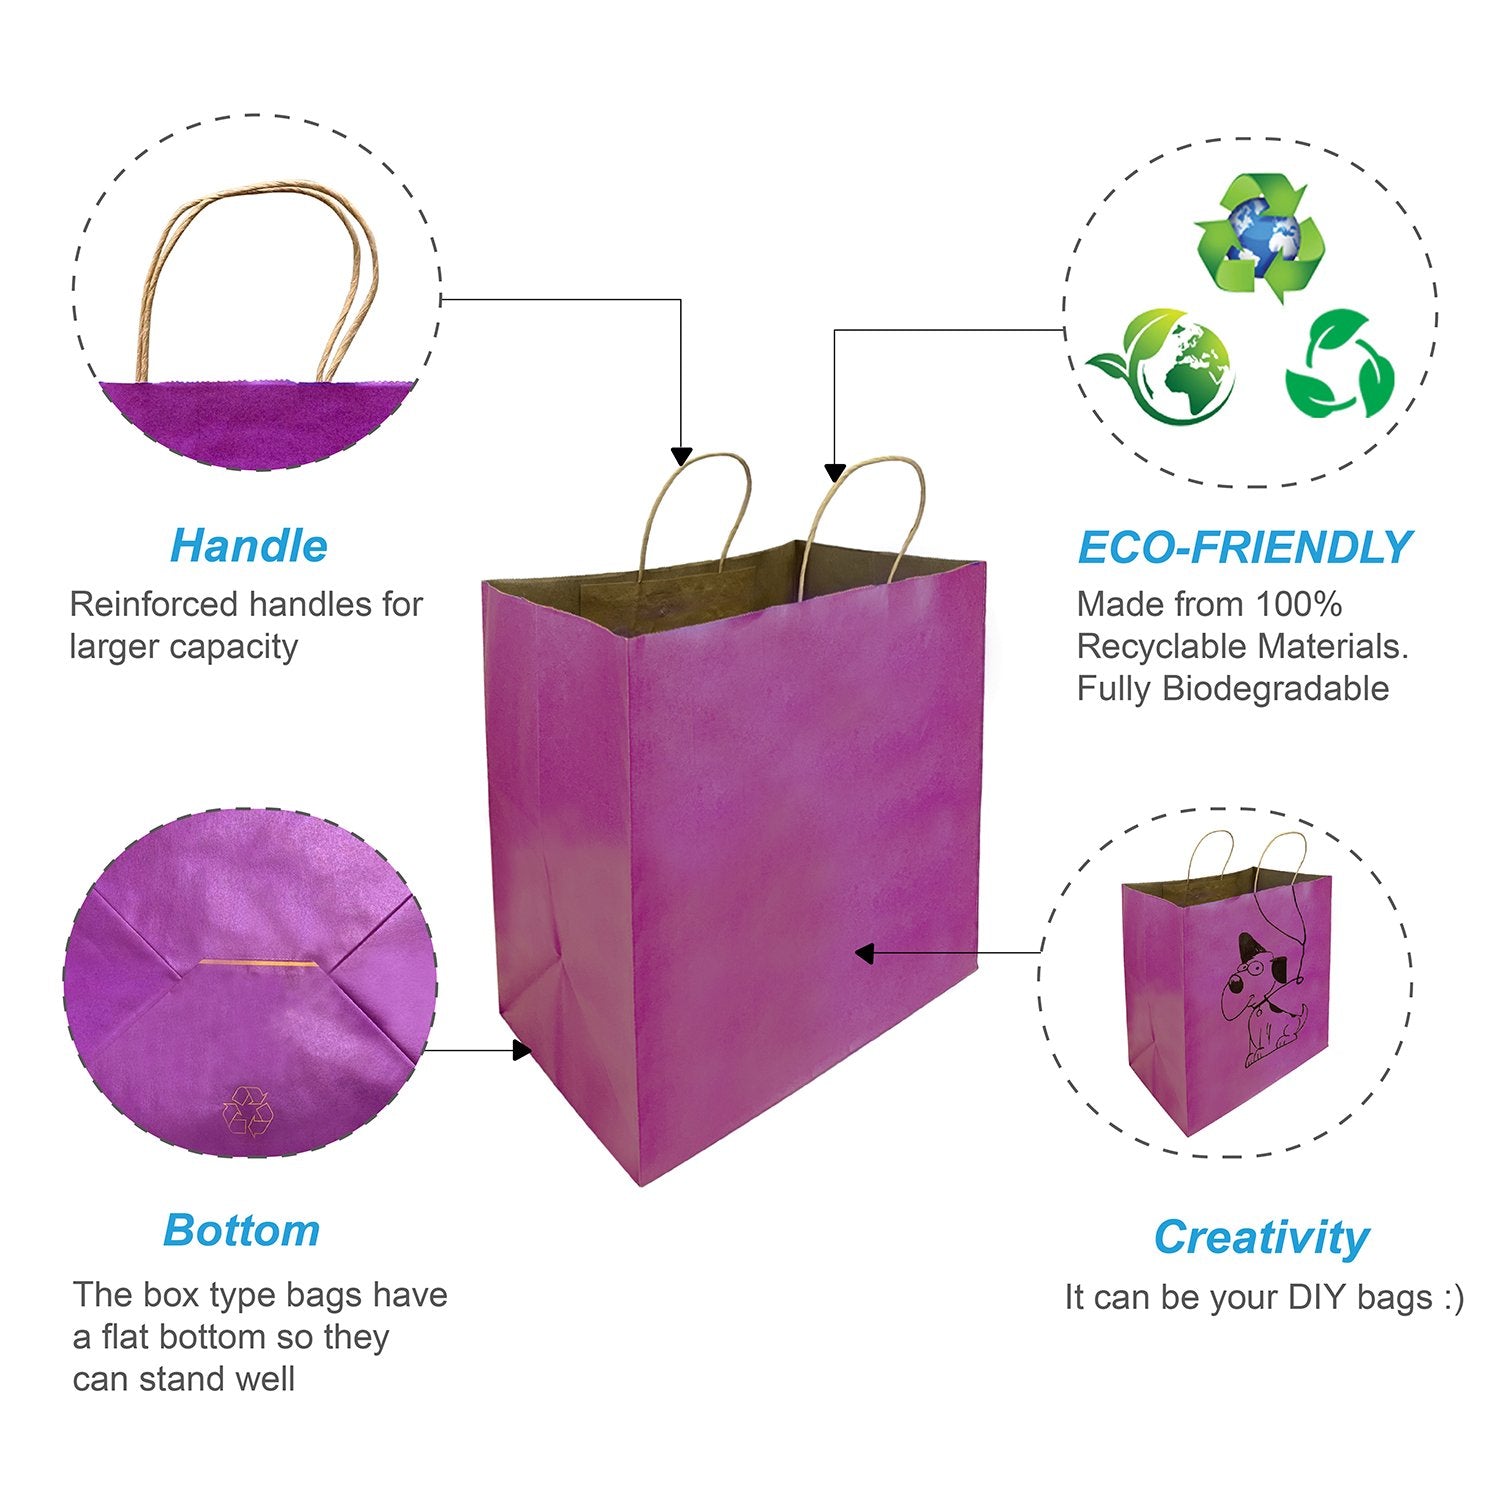 200 Pcs, Super Royal, 14x10x15.75 inches, Purple Kraft Paper Bags, with Twisted Handle